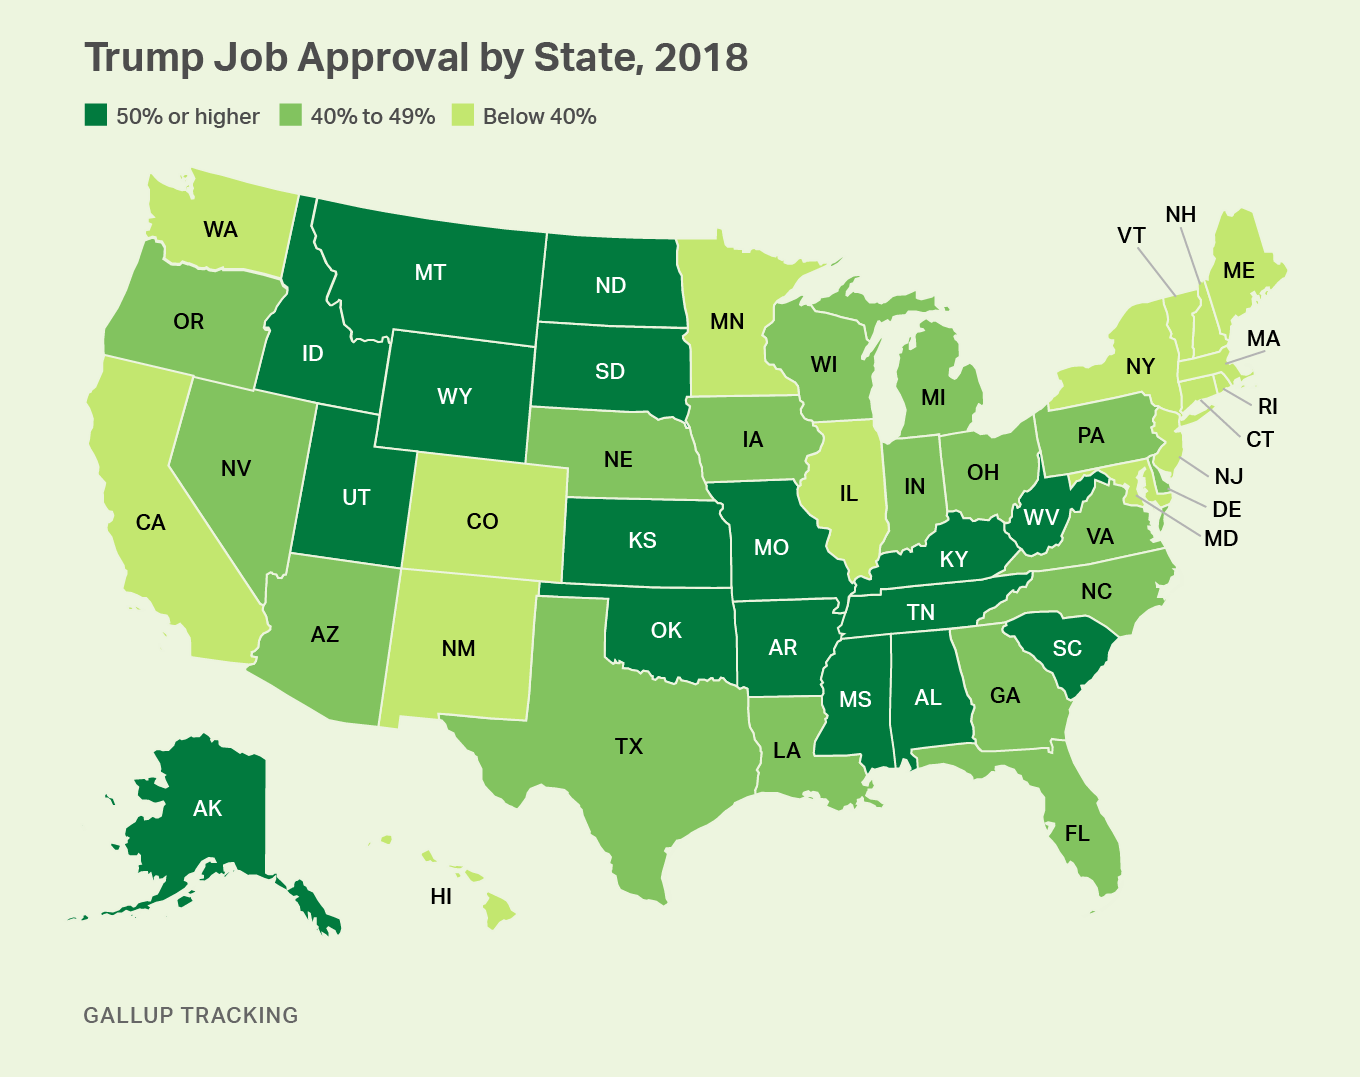 Map. President Trump Job Approval by State, 2018. Divided into 50%+ approval, 40%-49% approval, less than 40% approval.